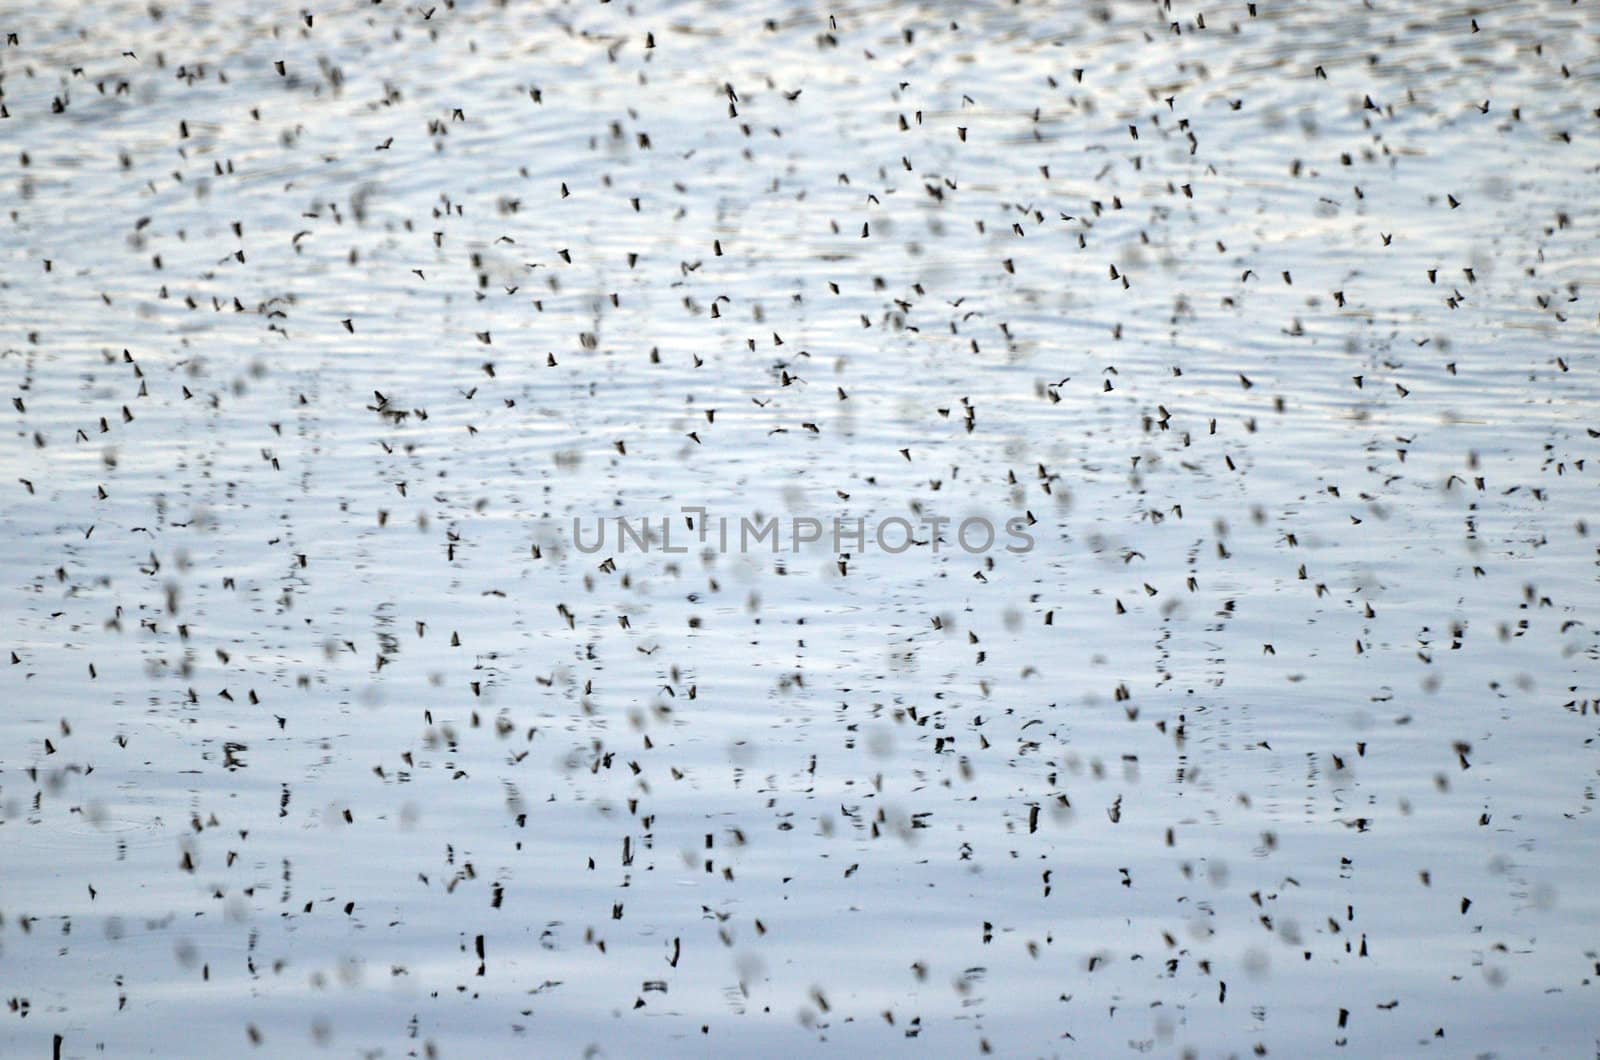 Many insects that swarm in the air above water